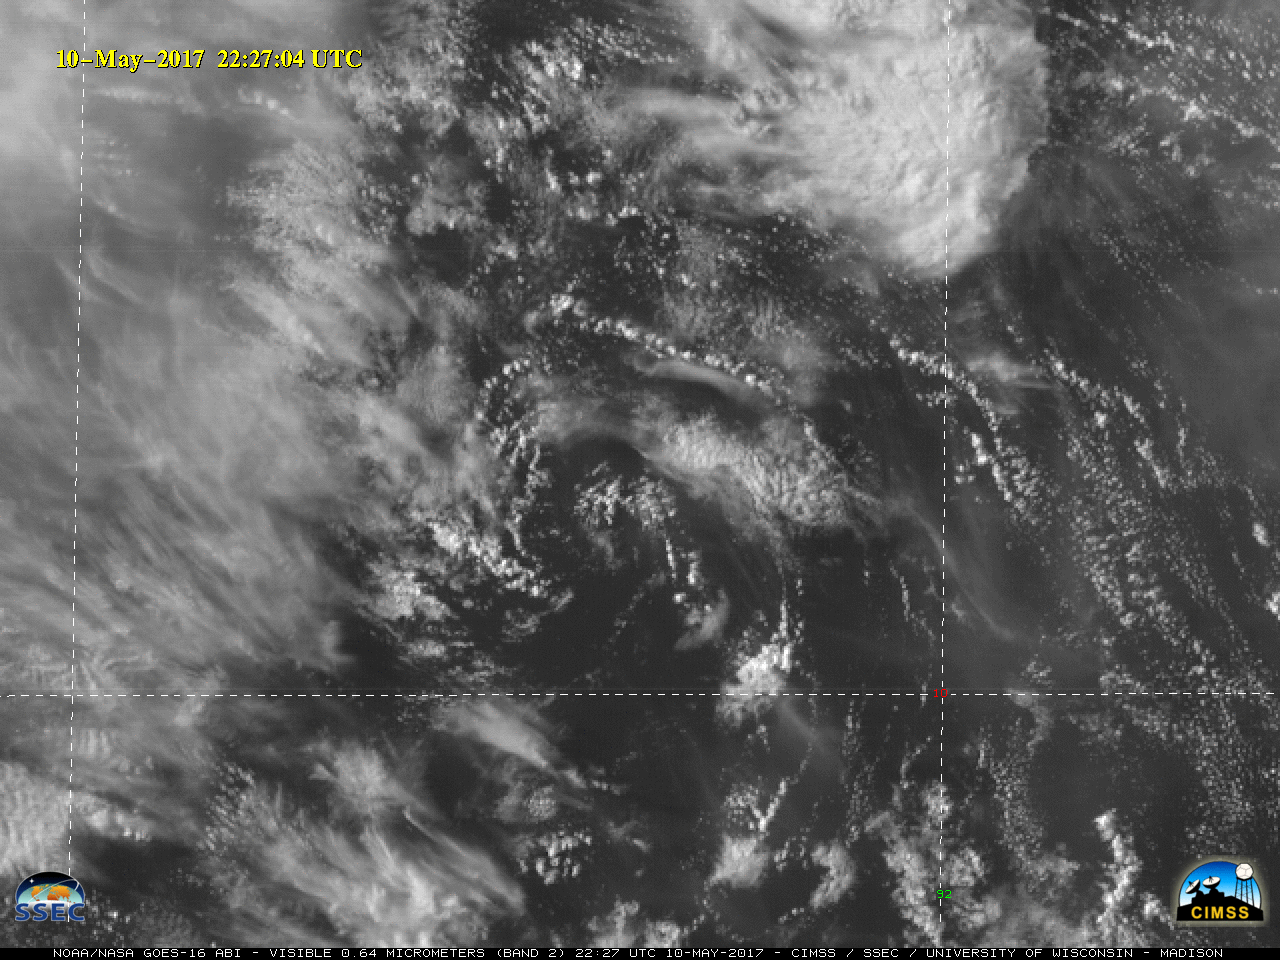 GOES-16 Visible (0.64 µm) mesoscale sector images [click to play animation]